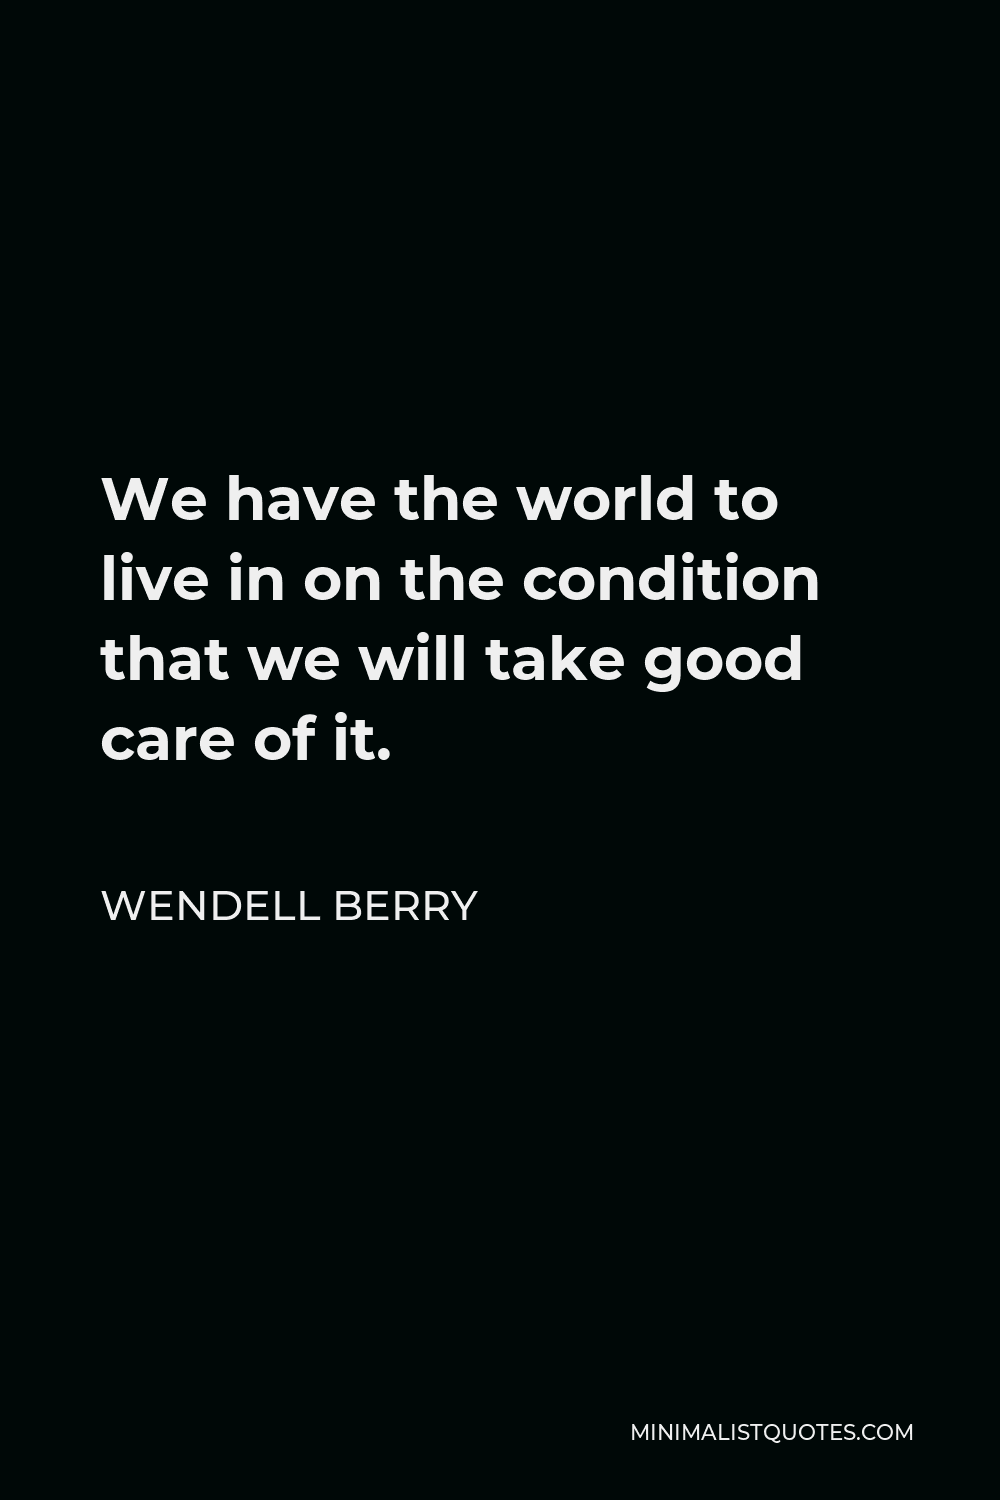 Wendell Berry Quote - We have the world to live in on the condition that we will take good care of it.